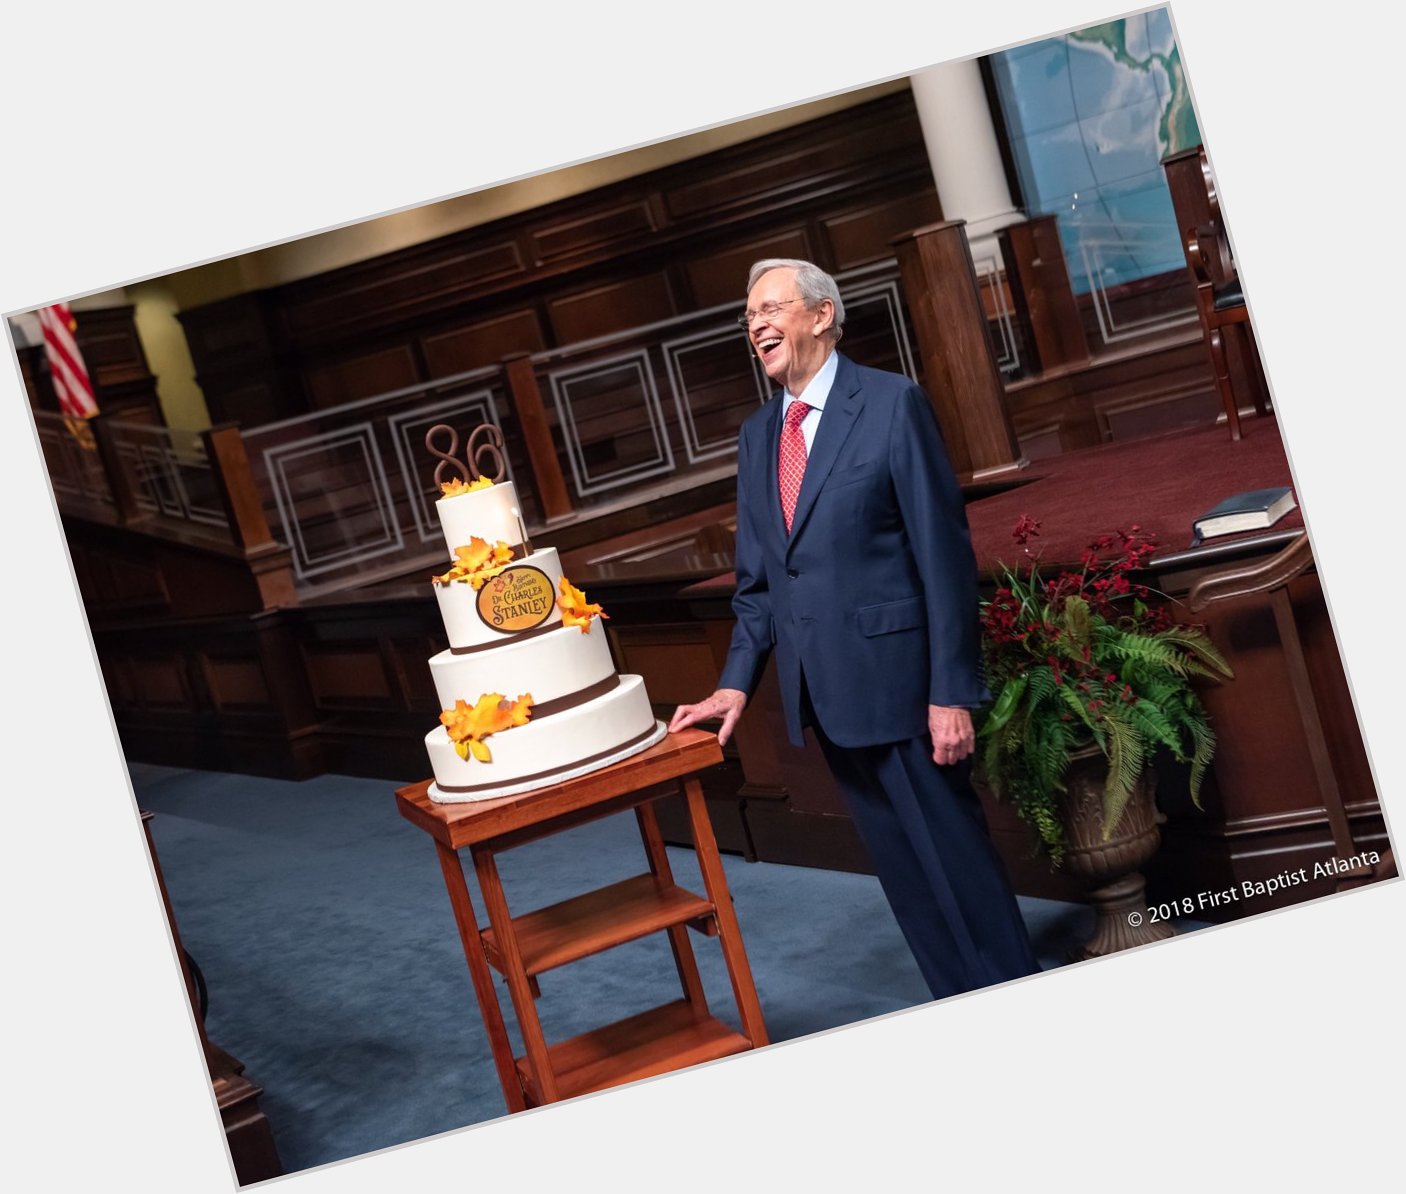 Happy Birthday to our long-time friend, Dr. Charles Stanley! 